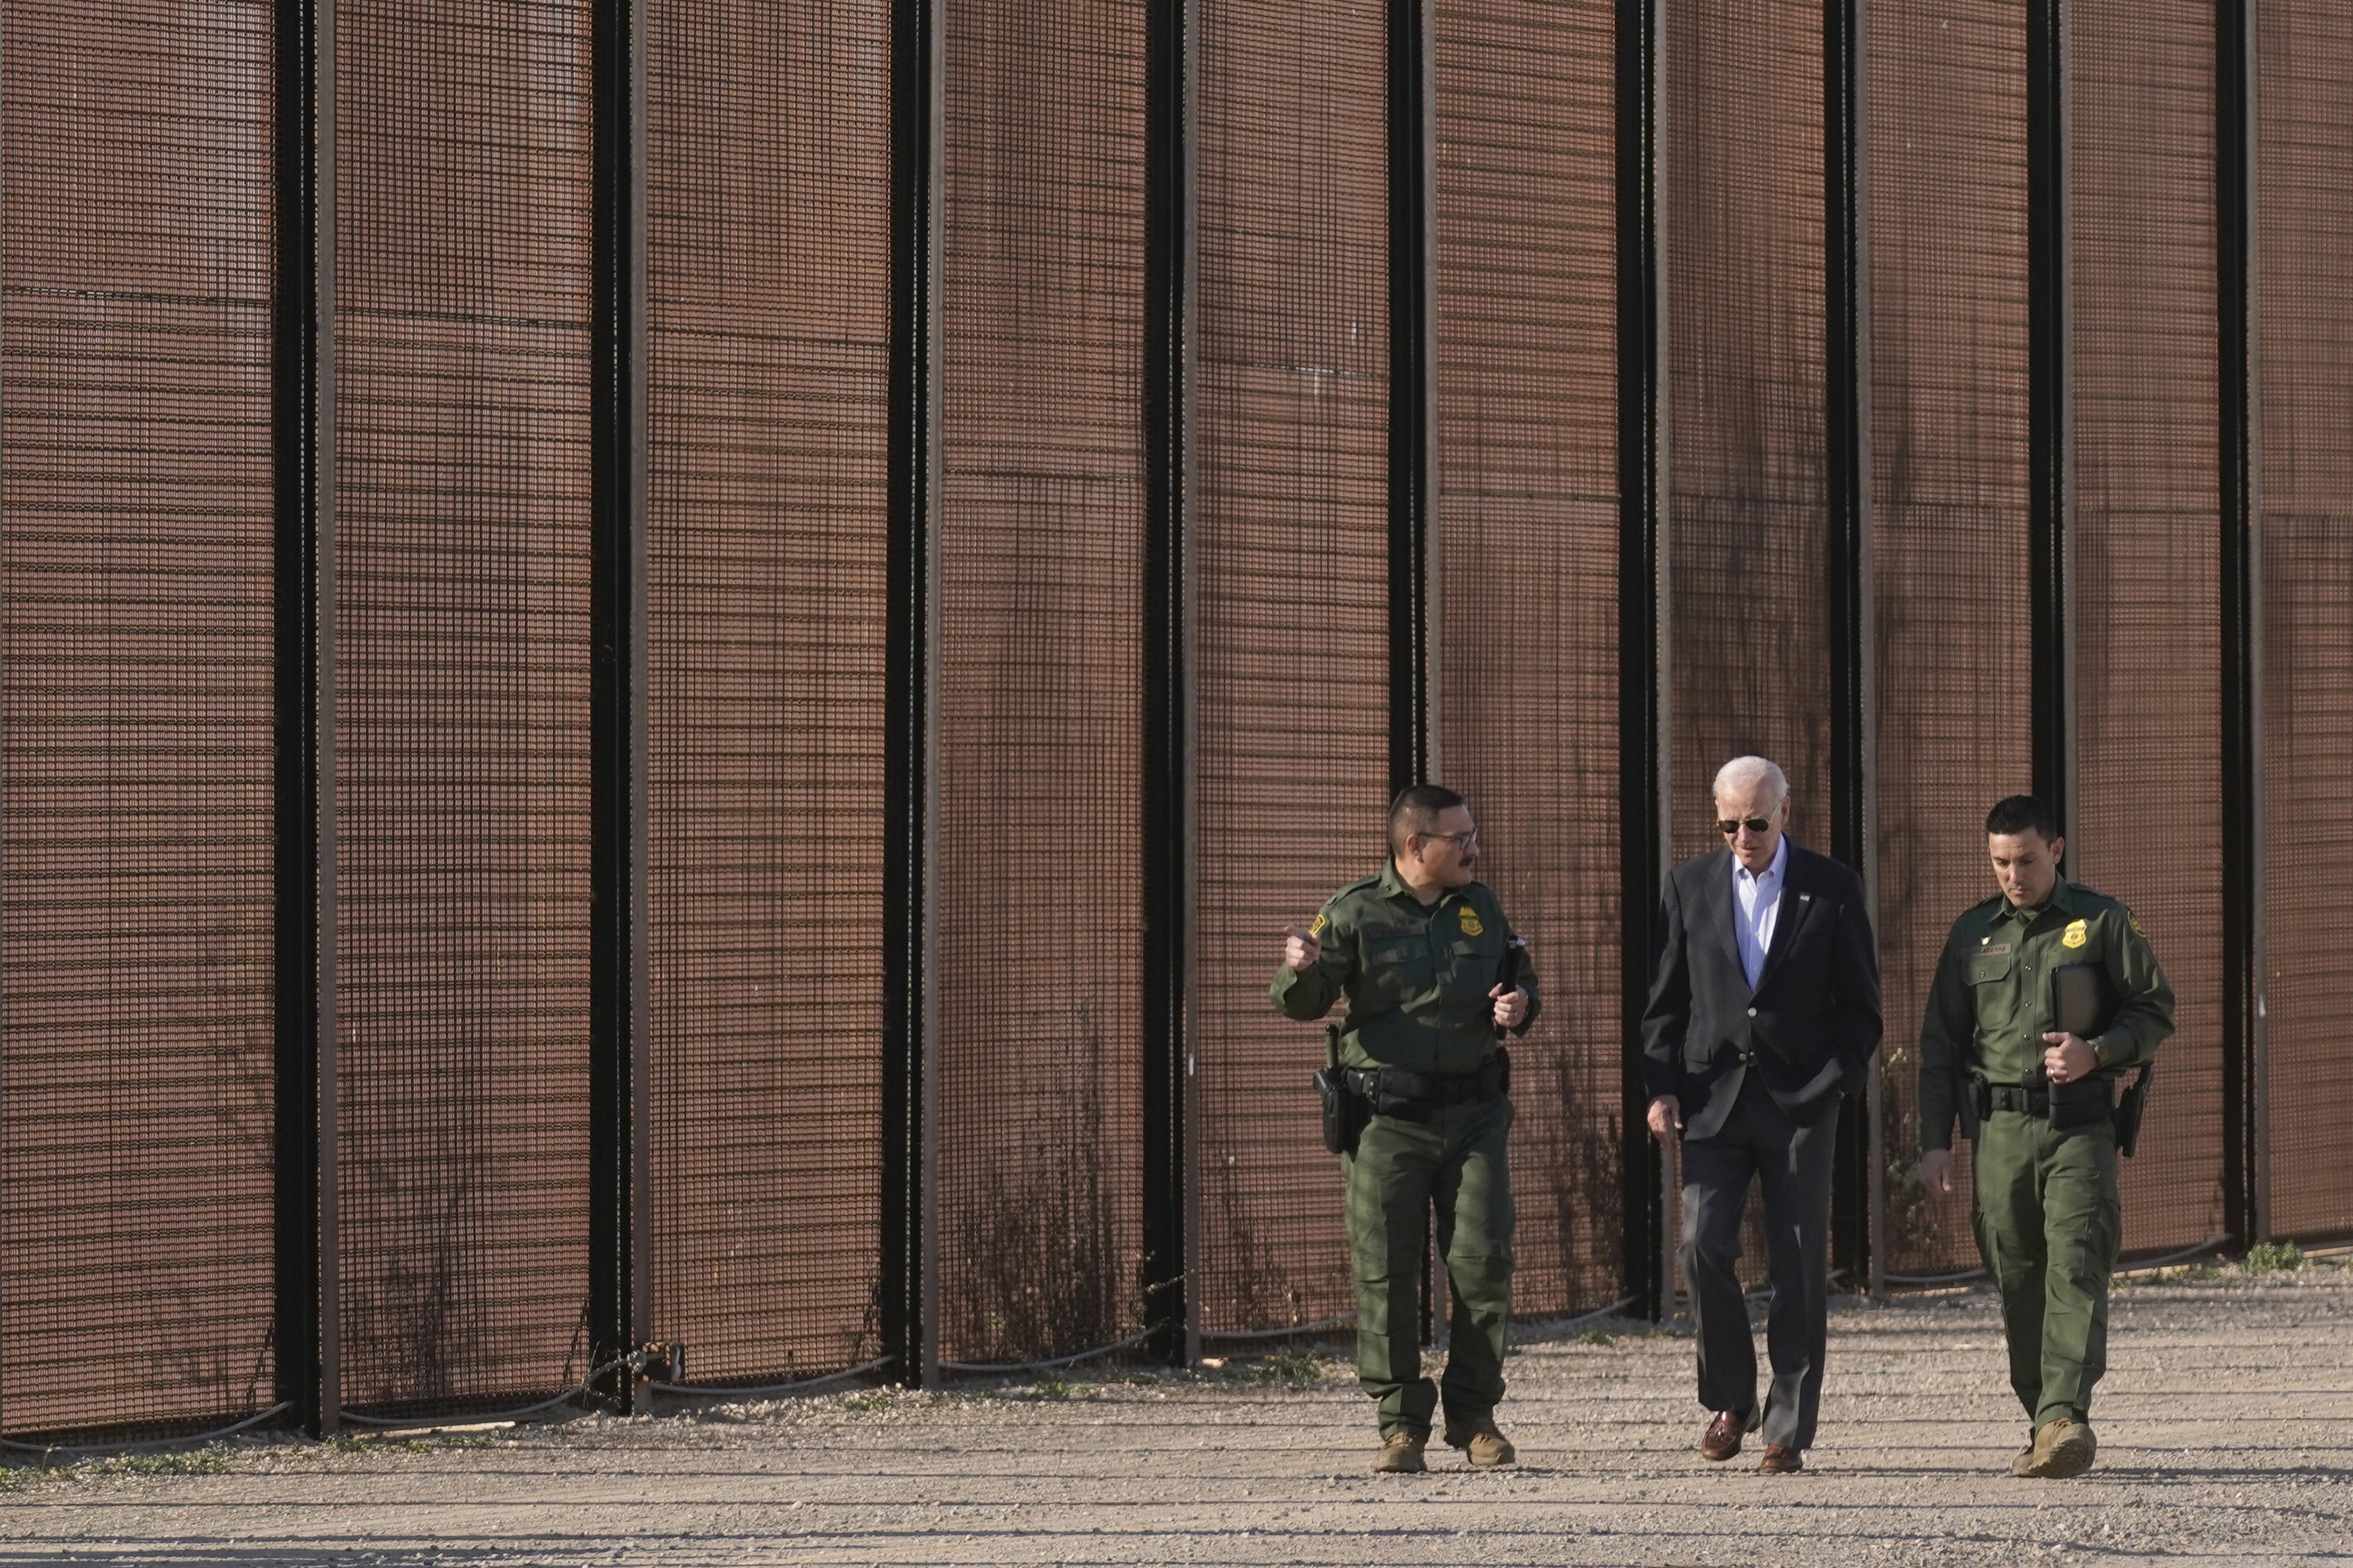 Forecast: Come November, Biden can expect border backlash at voting booth